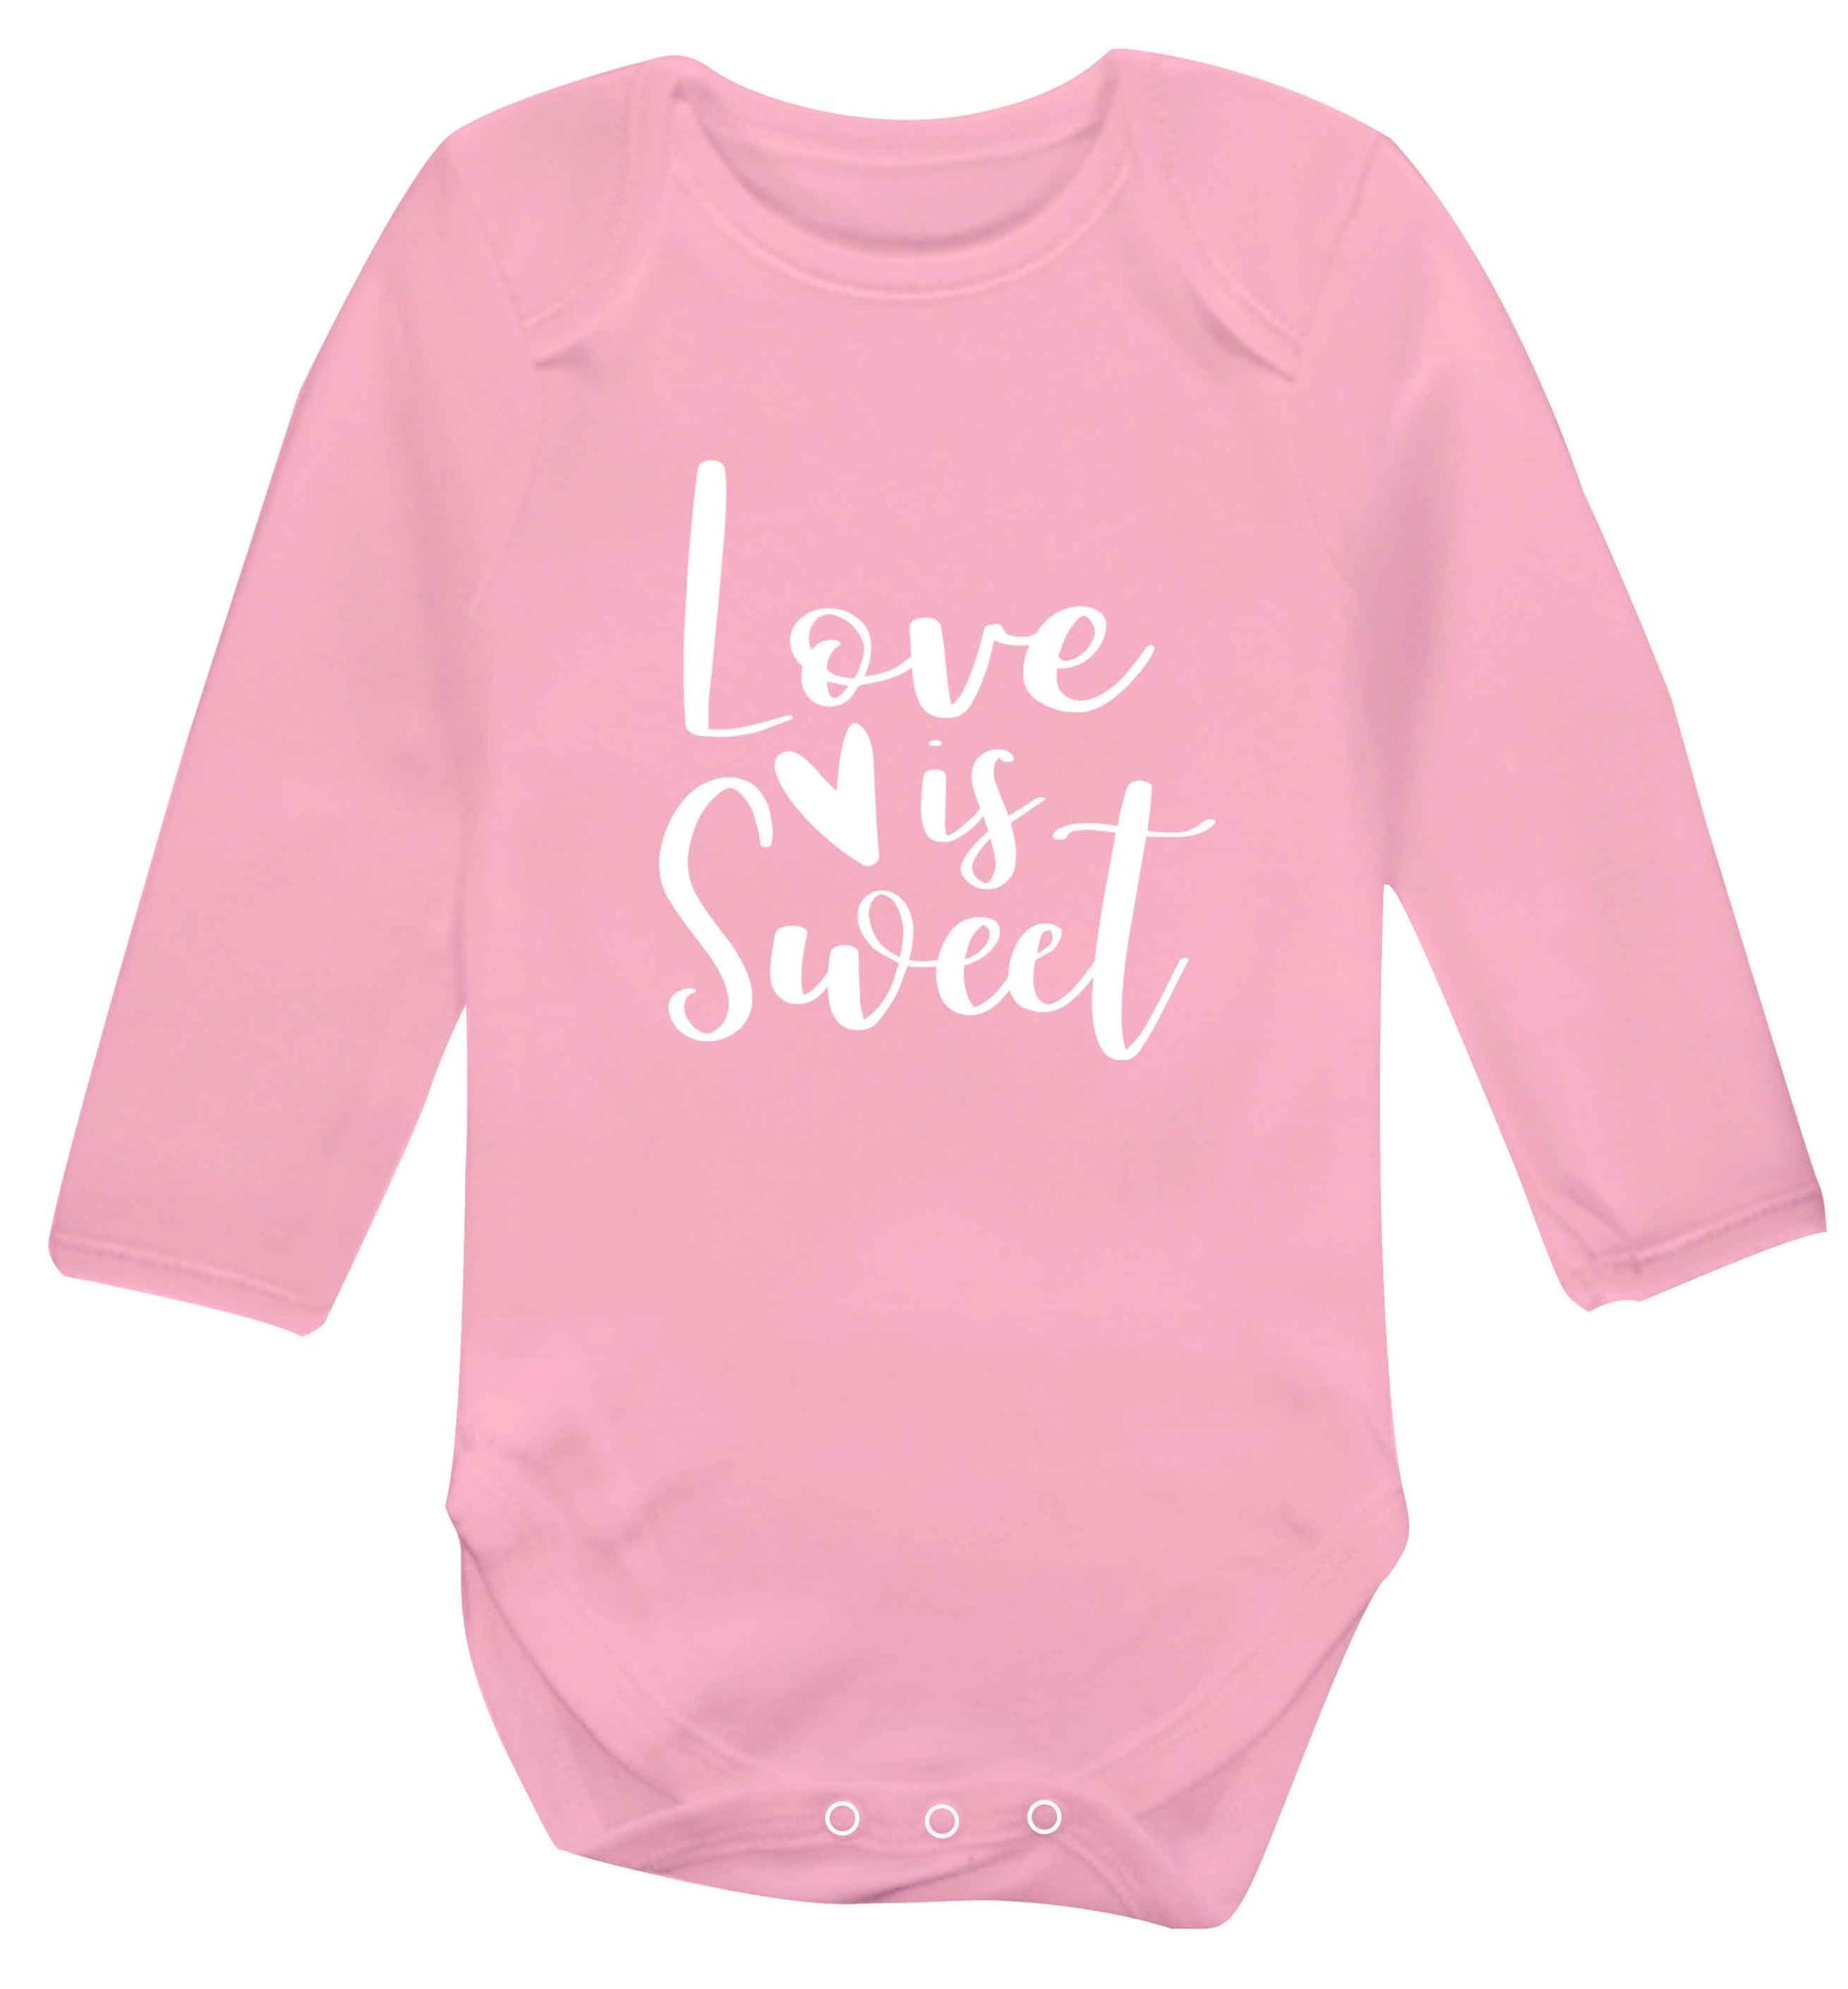 Love really does make the world go round! Ideal for weddings, valentines or just simply to show someone you love them!  baby vest long sleeved pale pink 6-12 months